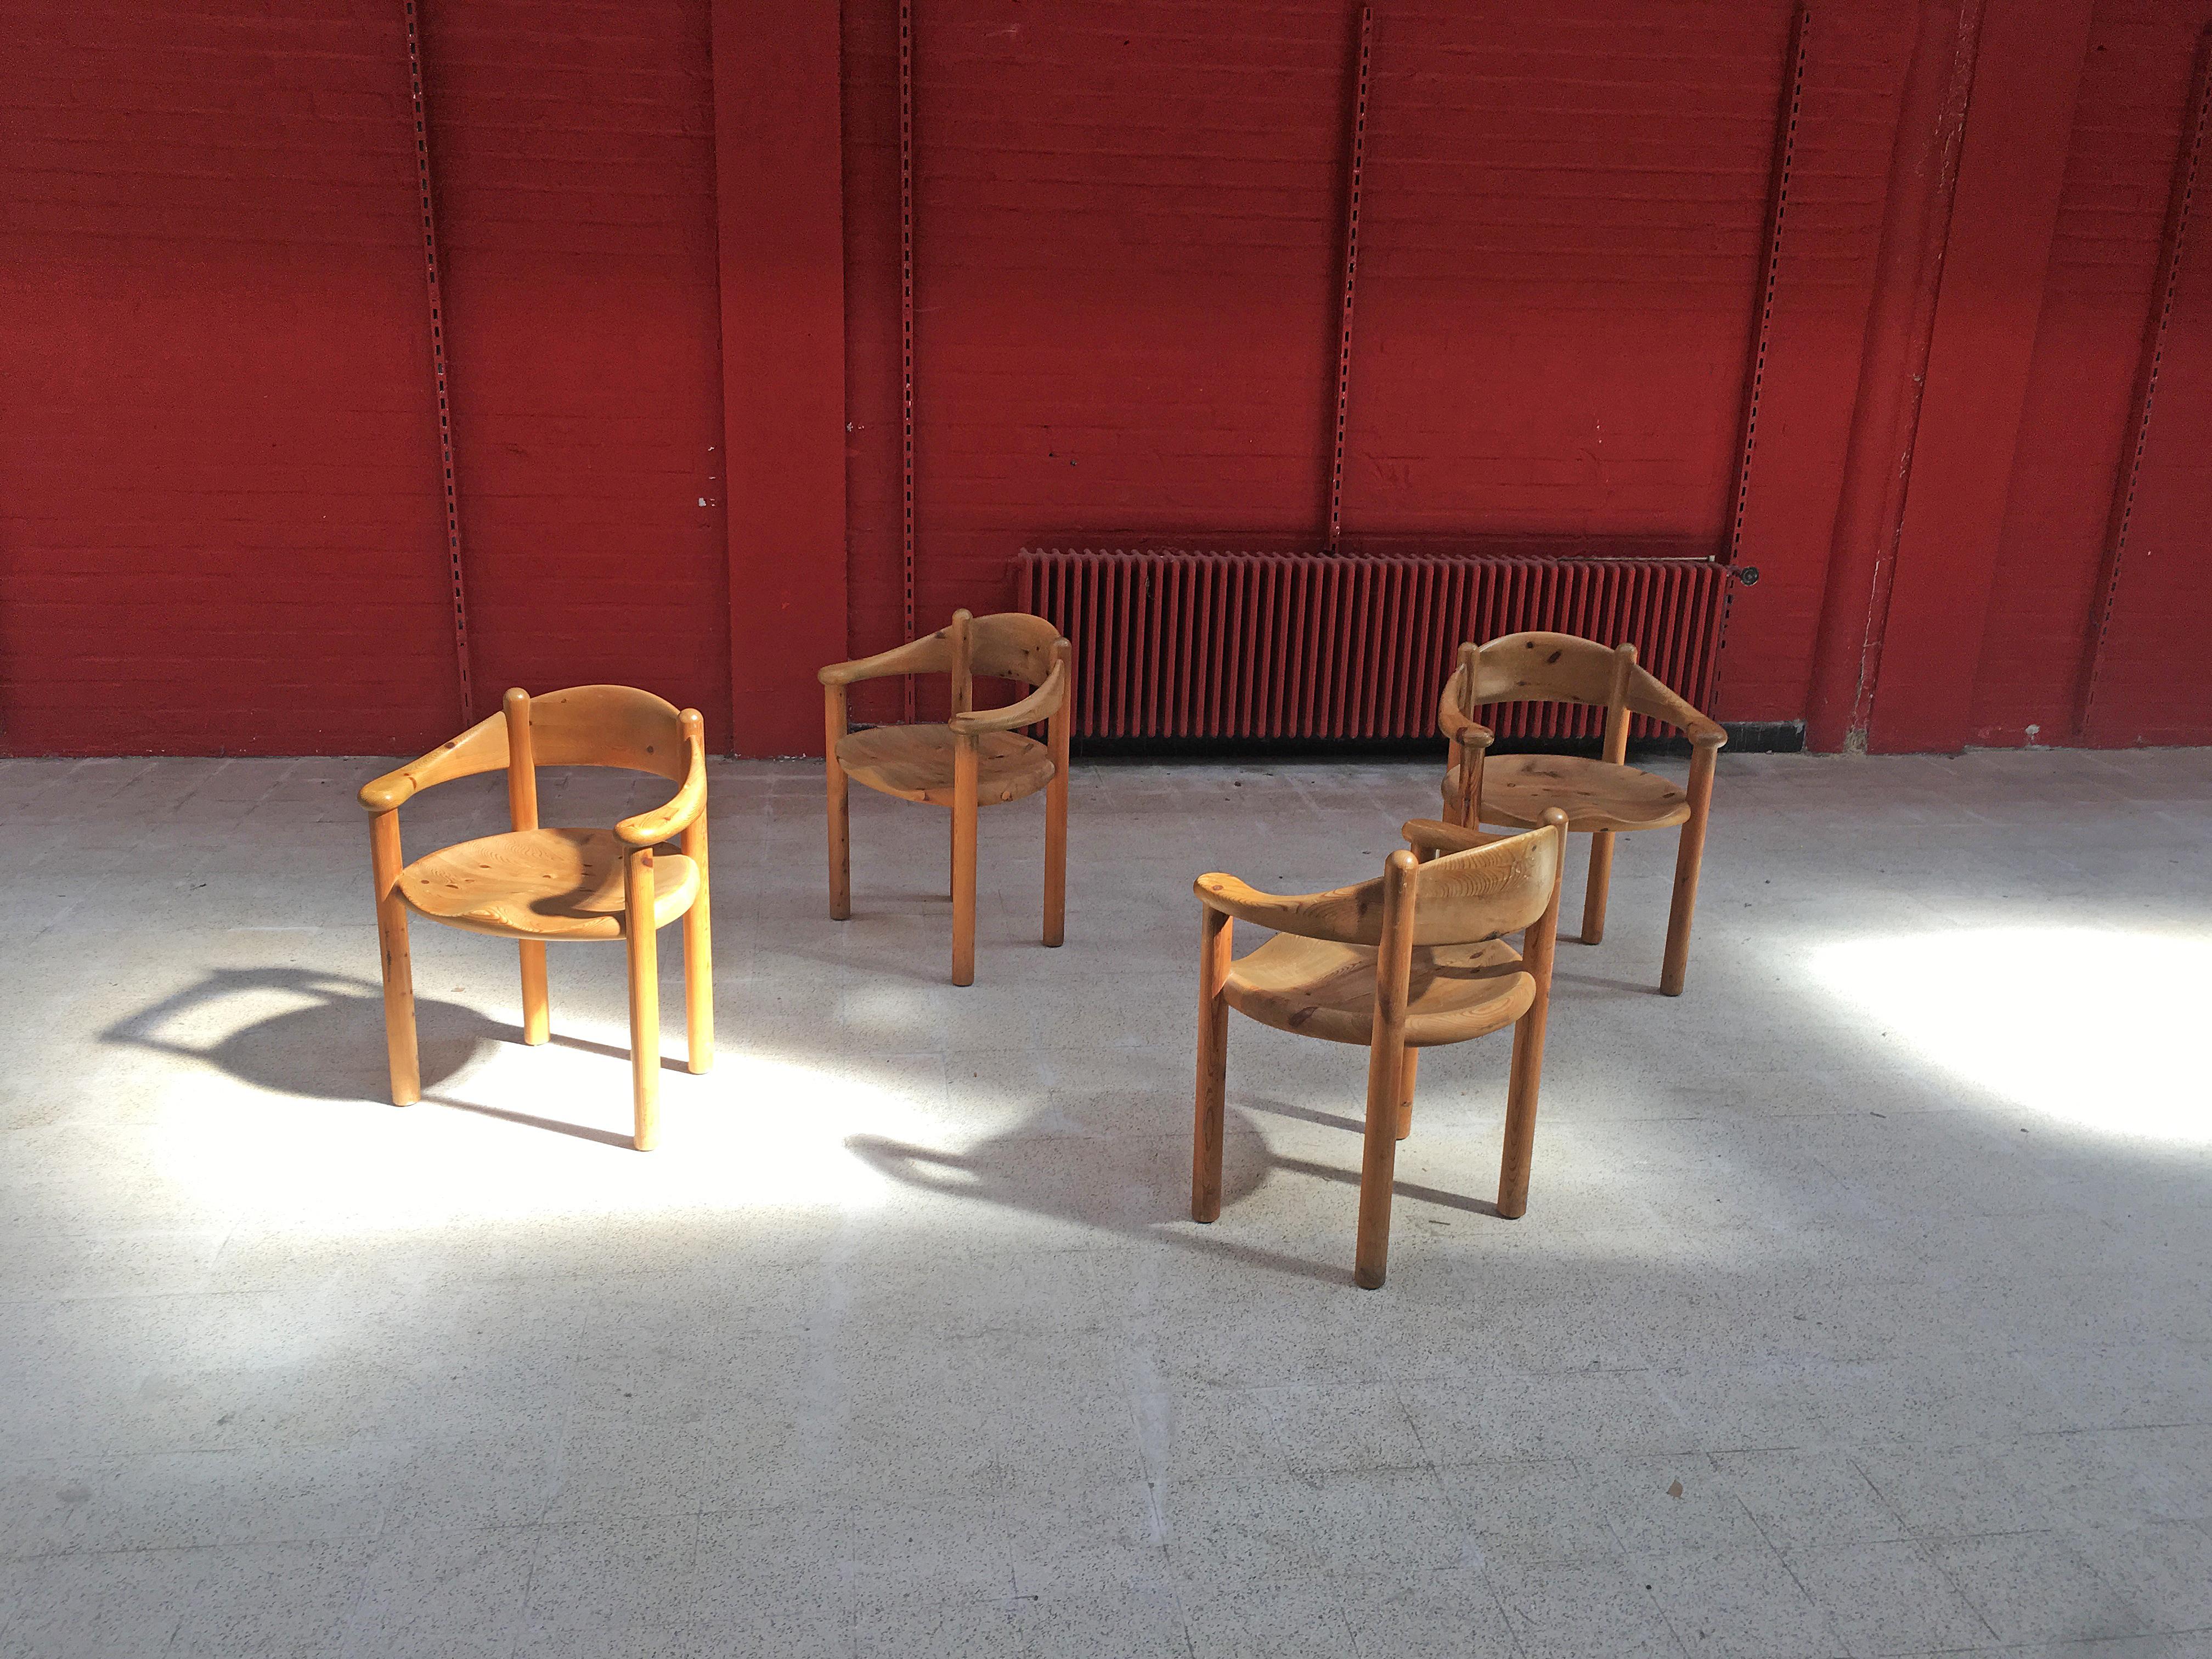 Rainer Daumiller, set of 4 chairs and 1 table for Hirtshals Savvaerk, circa 1970
Small strokes on the table top.
The extensions are missing.
Table measures: D 128 cm, H 73 cm
Dimensions of the table with the extensions: 73 x 278 x 128 cm
Chair: